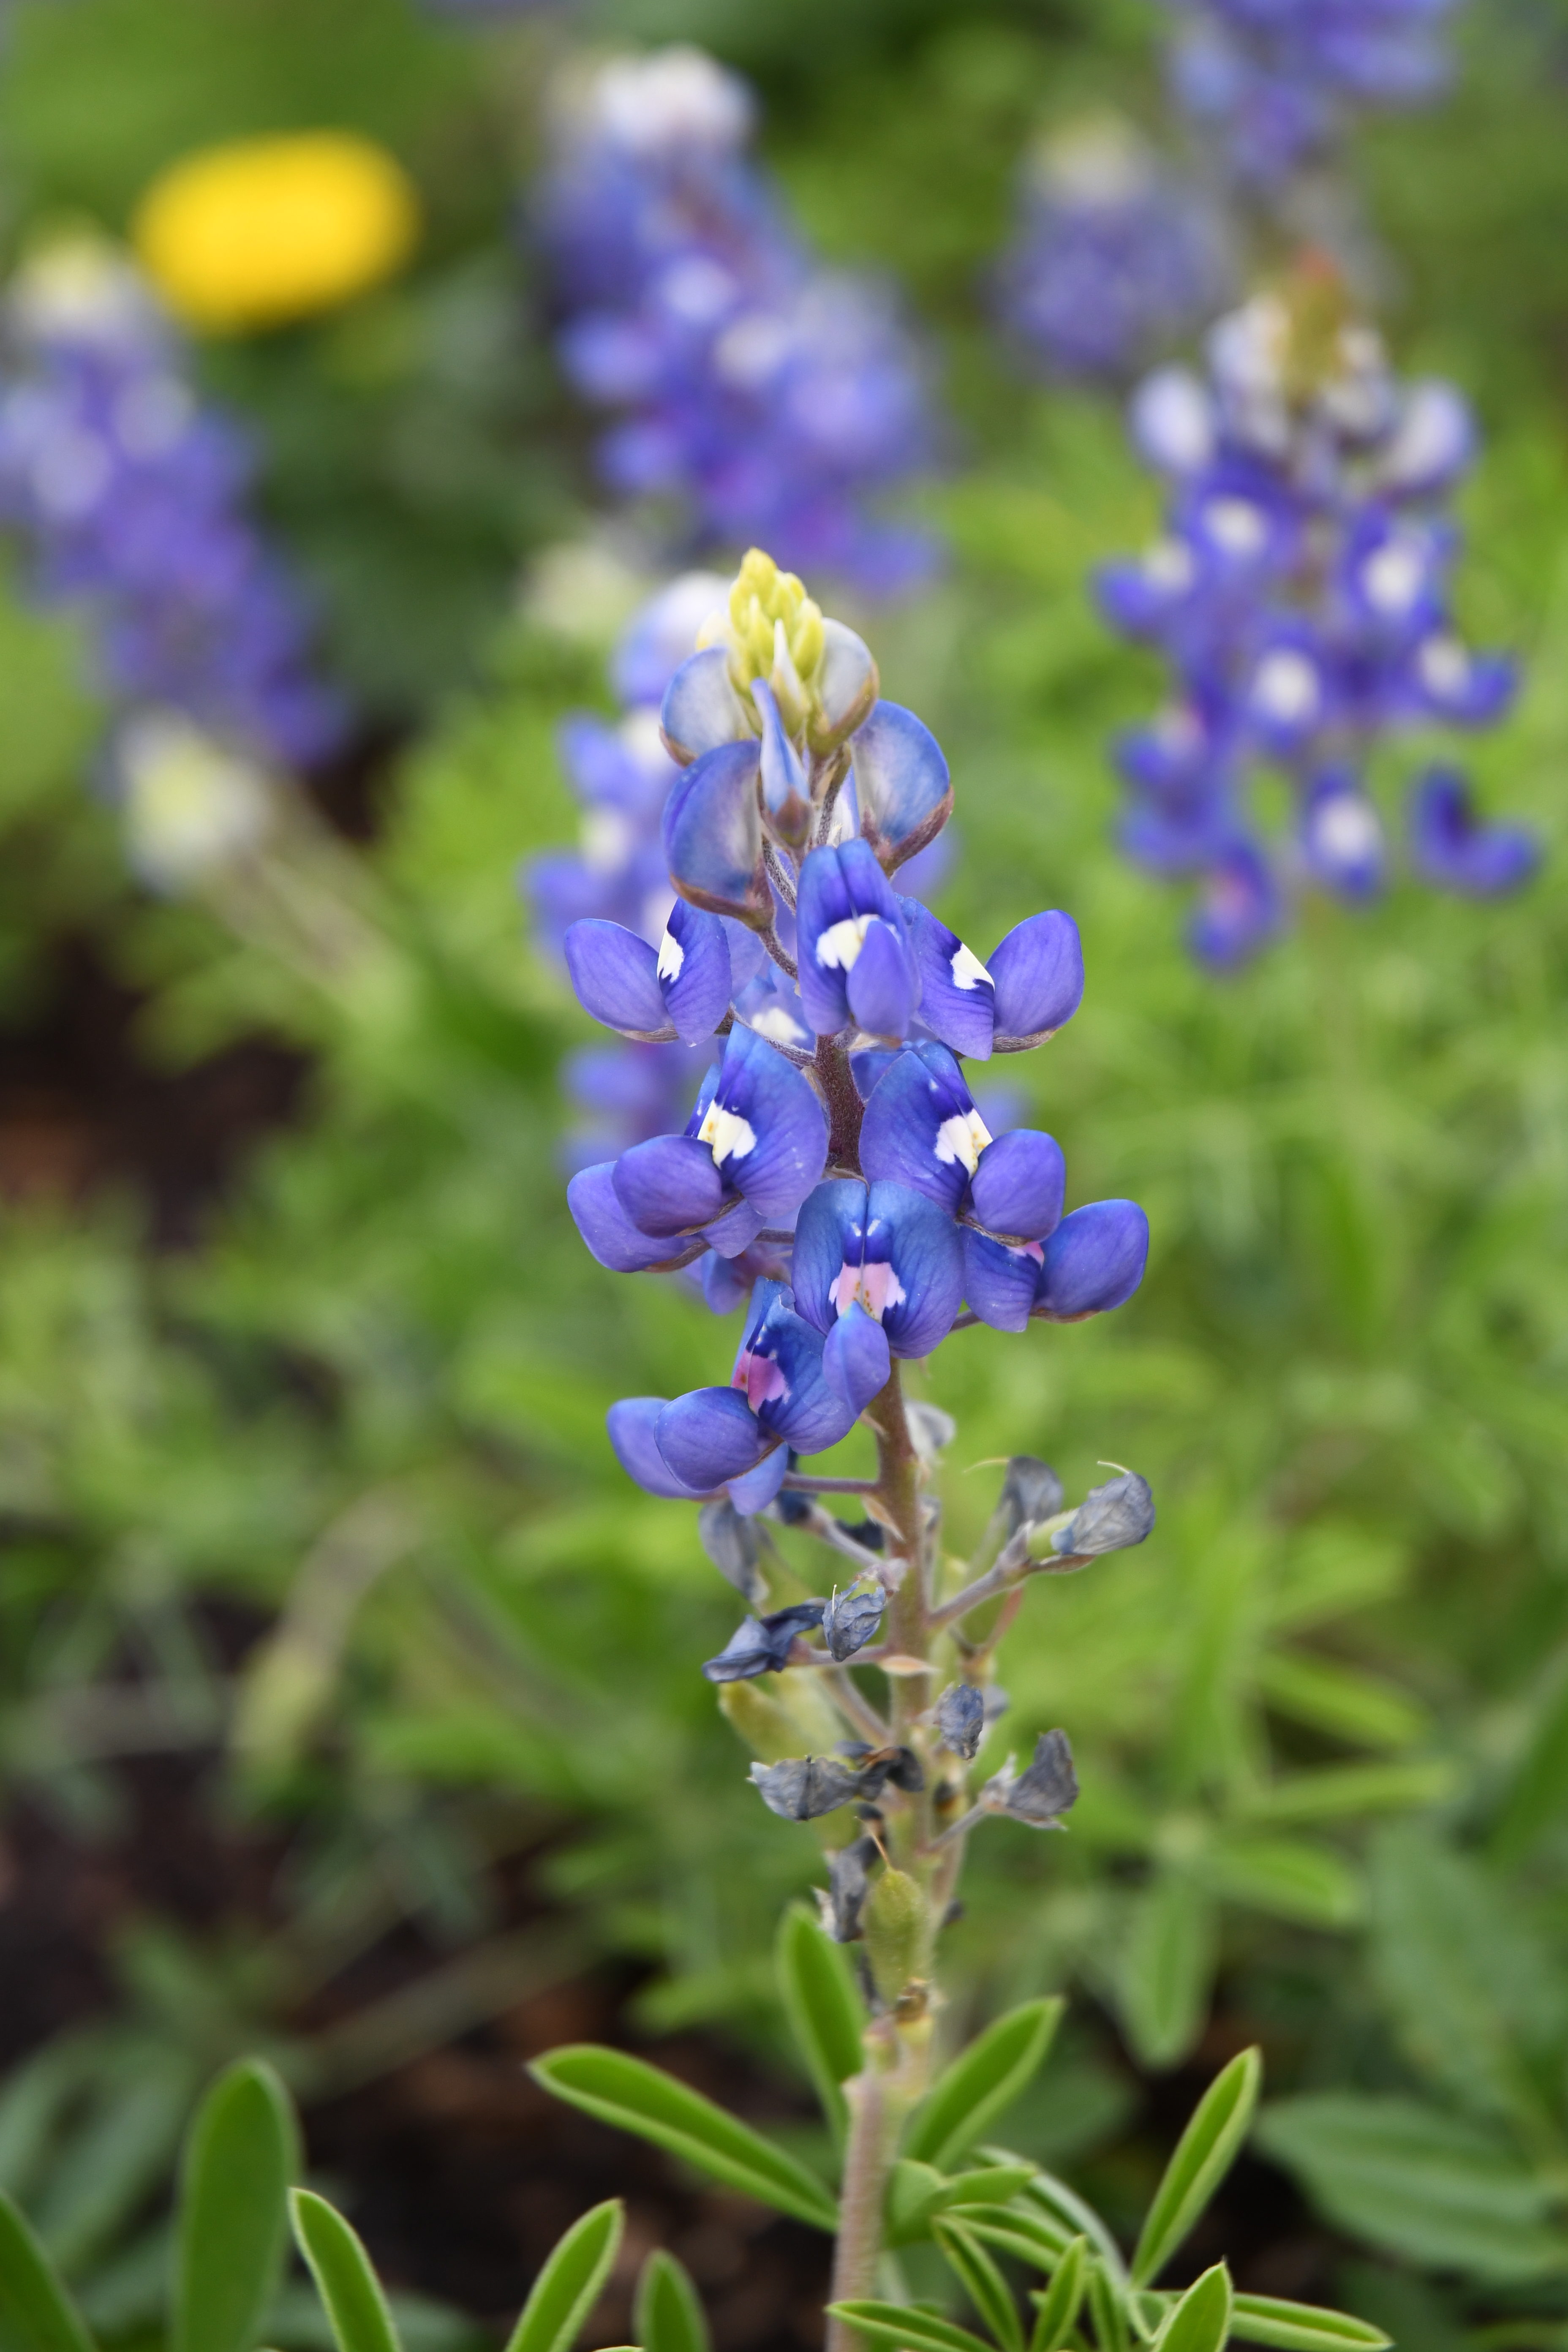 horticulturist-grow-bluebonnets-instead-of-picking-them-agrilife-today